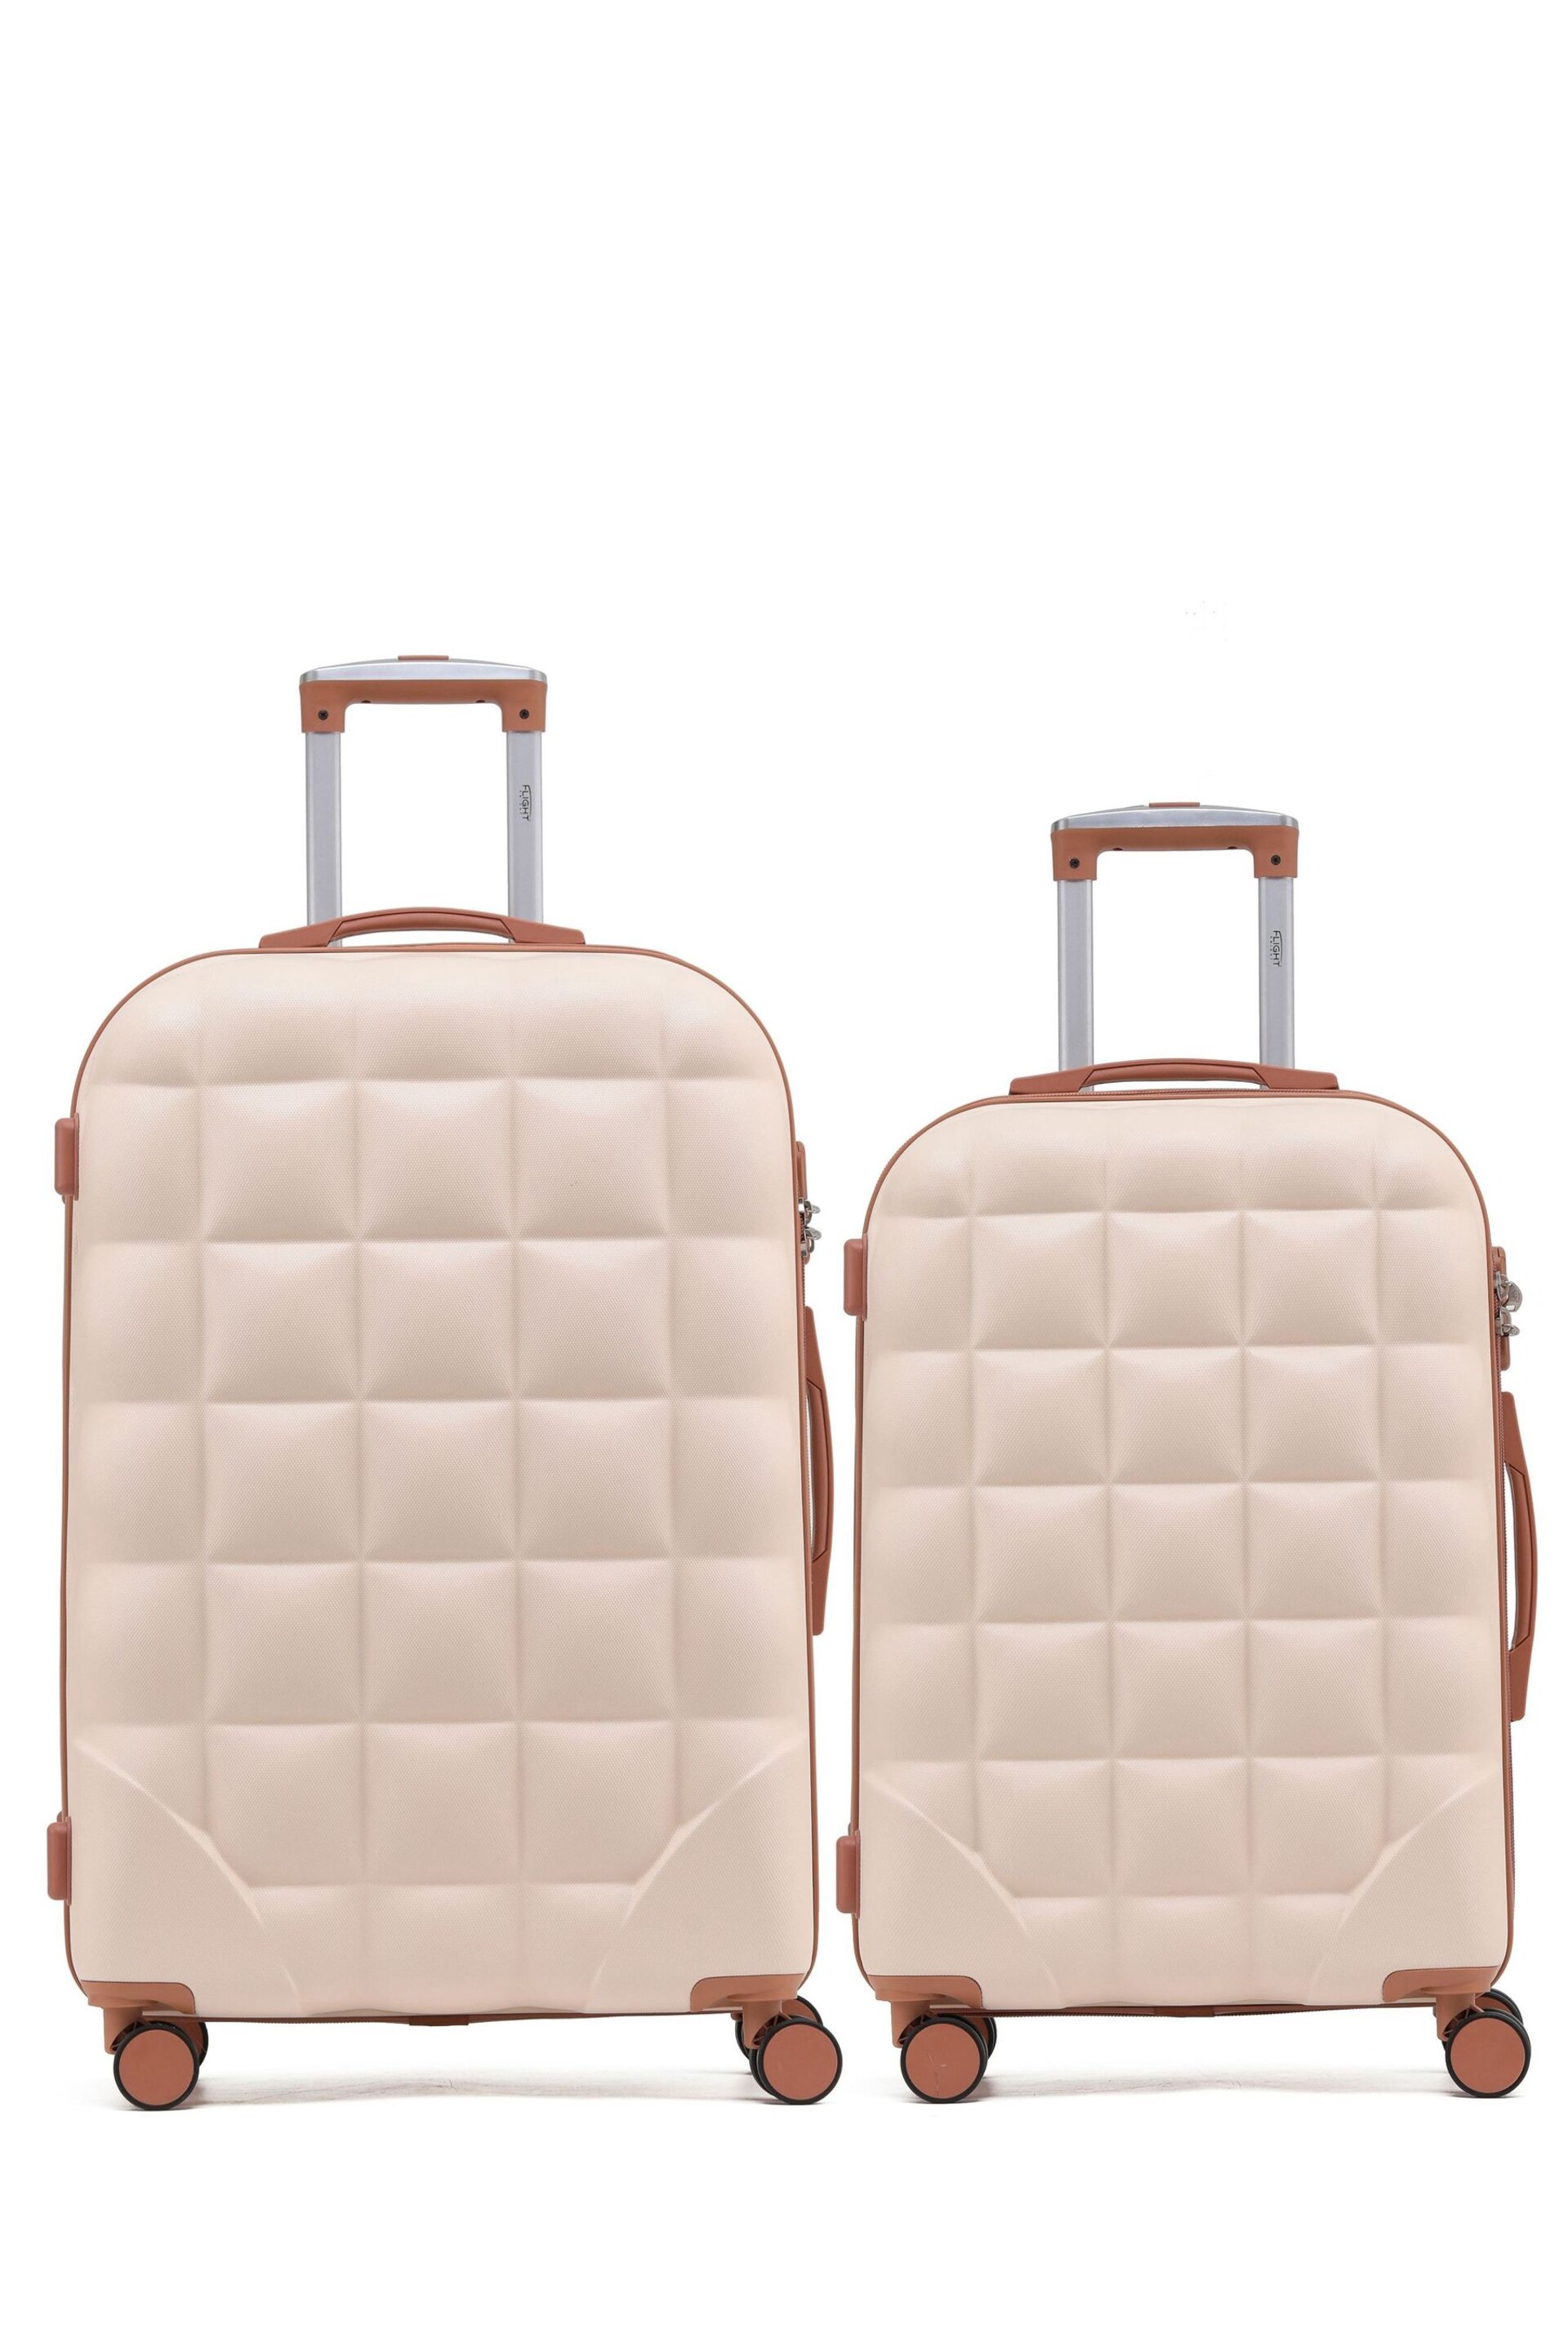 Flight Knight Medium Cream Check-In & Small Carry-On Bubble Hardcase Travel Luggage Set Of 2 - Image 1 of 6